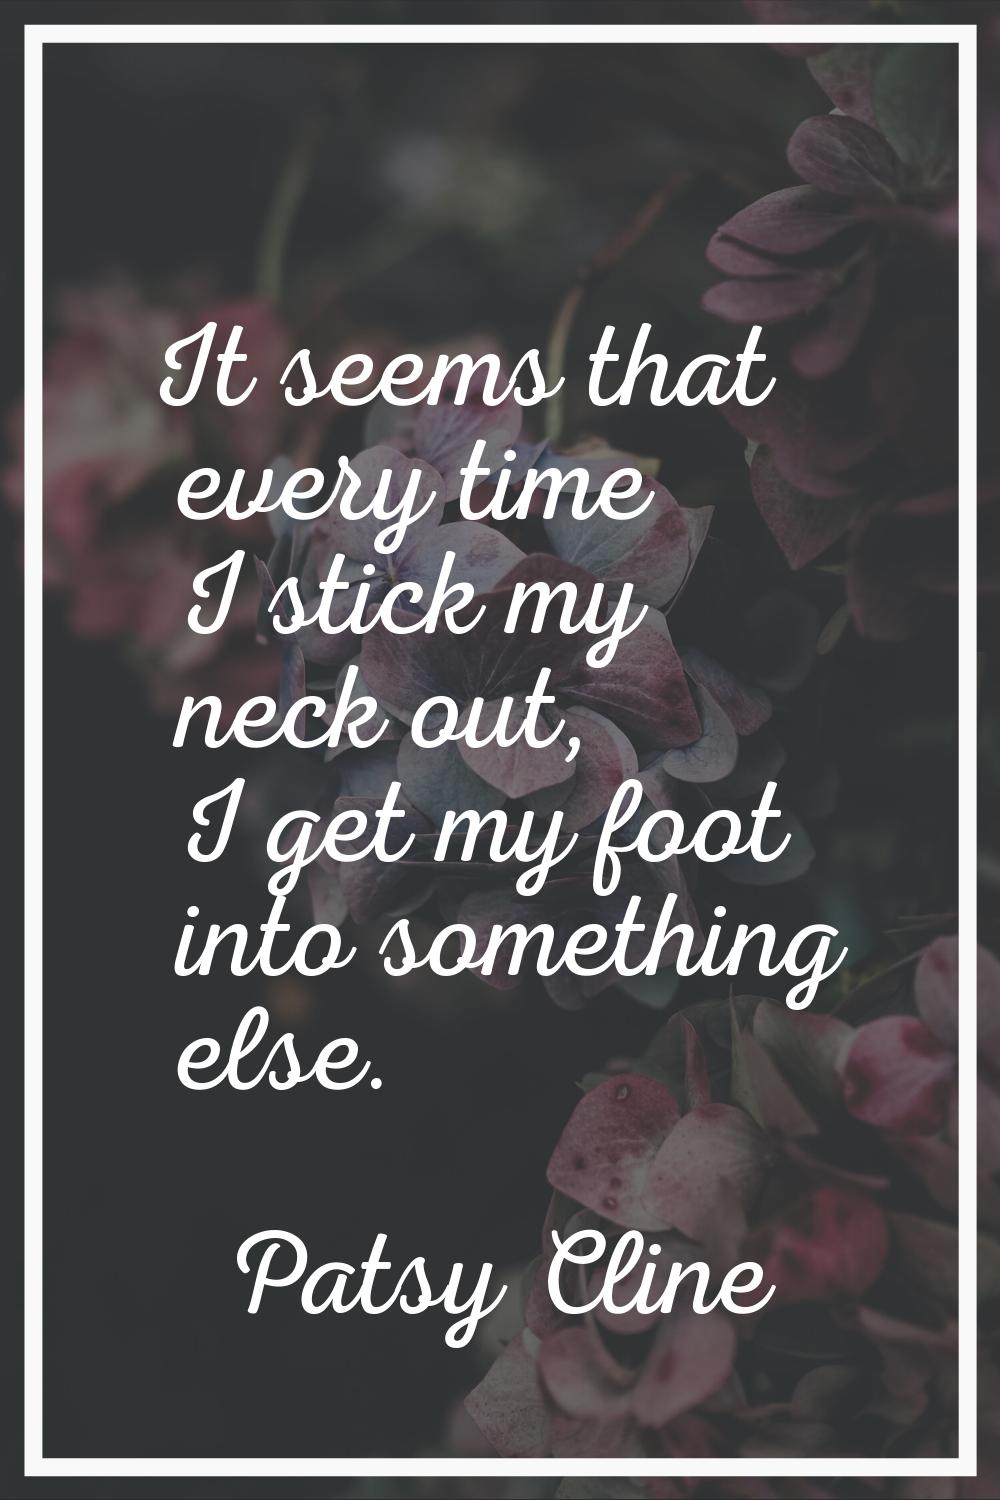 It seems that every time I stick my neck out, I get my foot into something else.